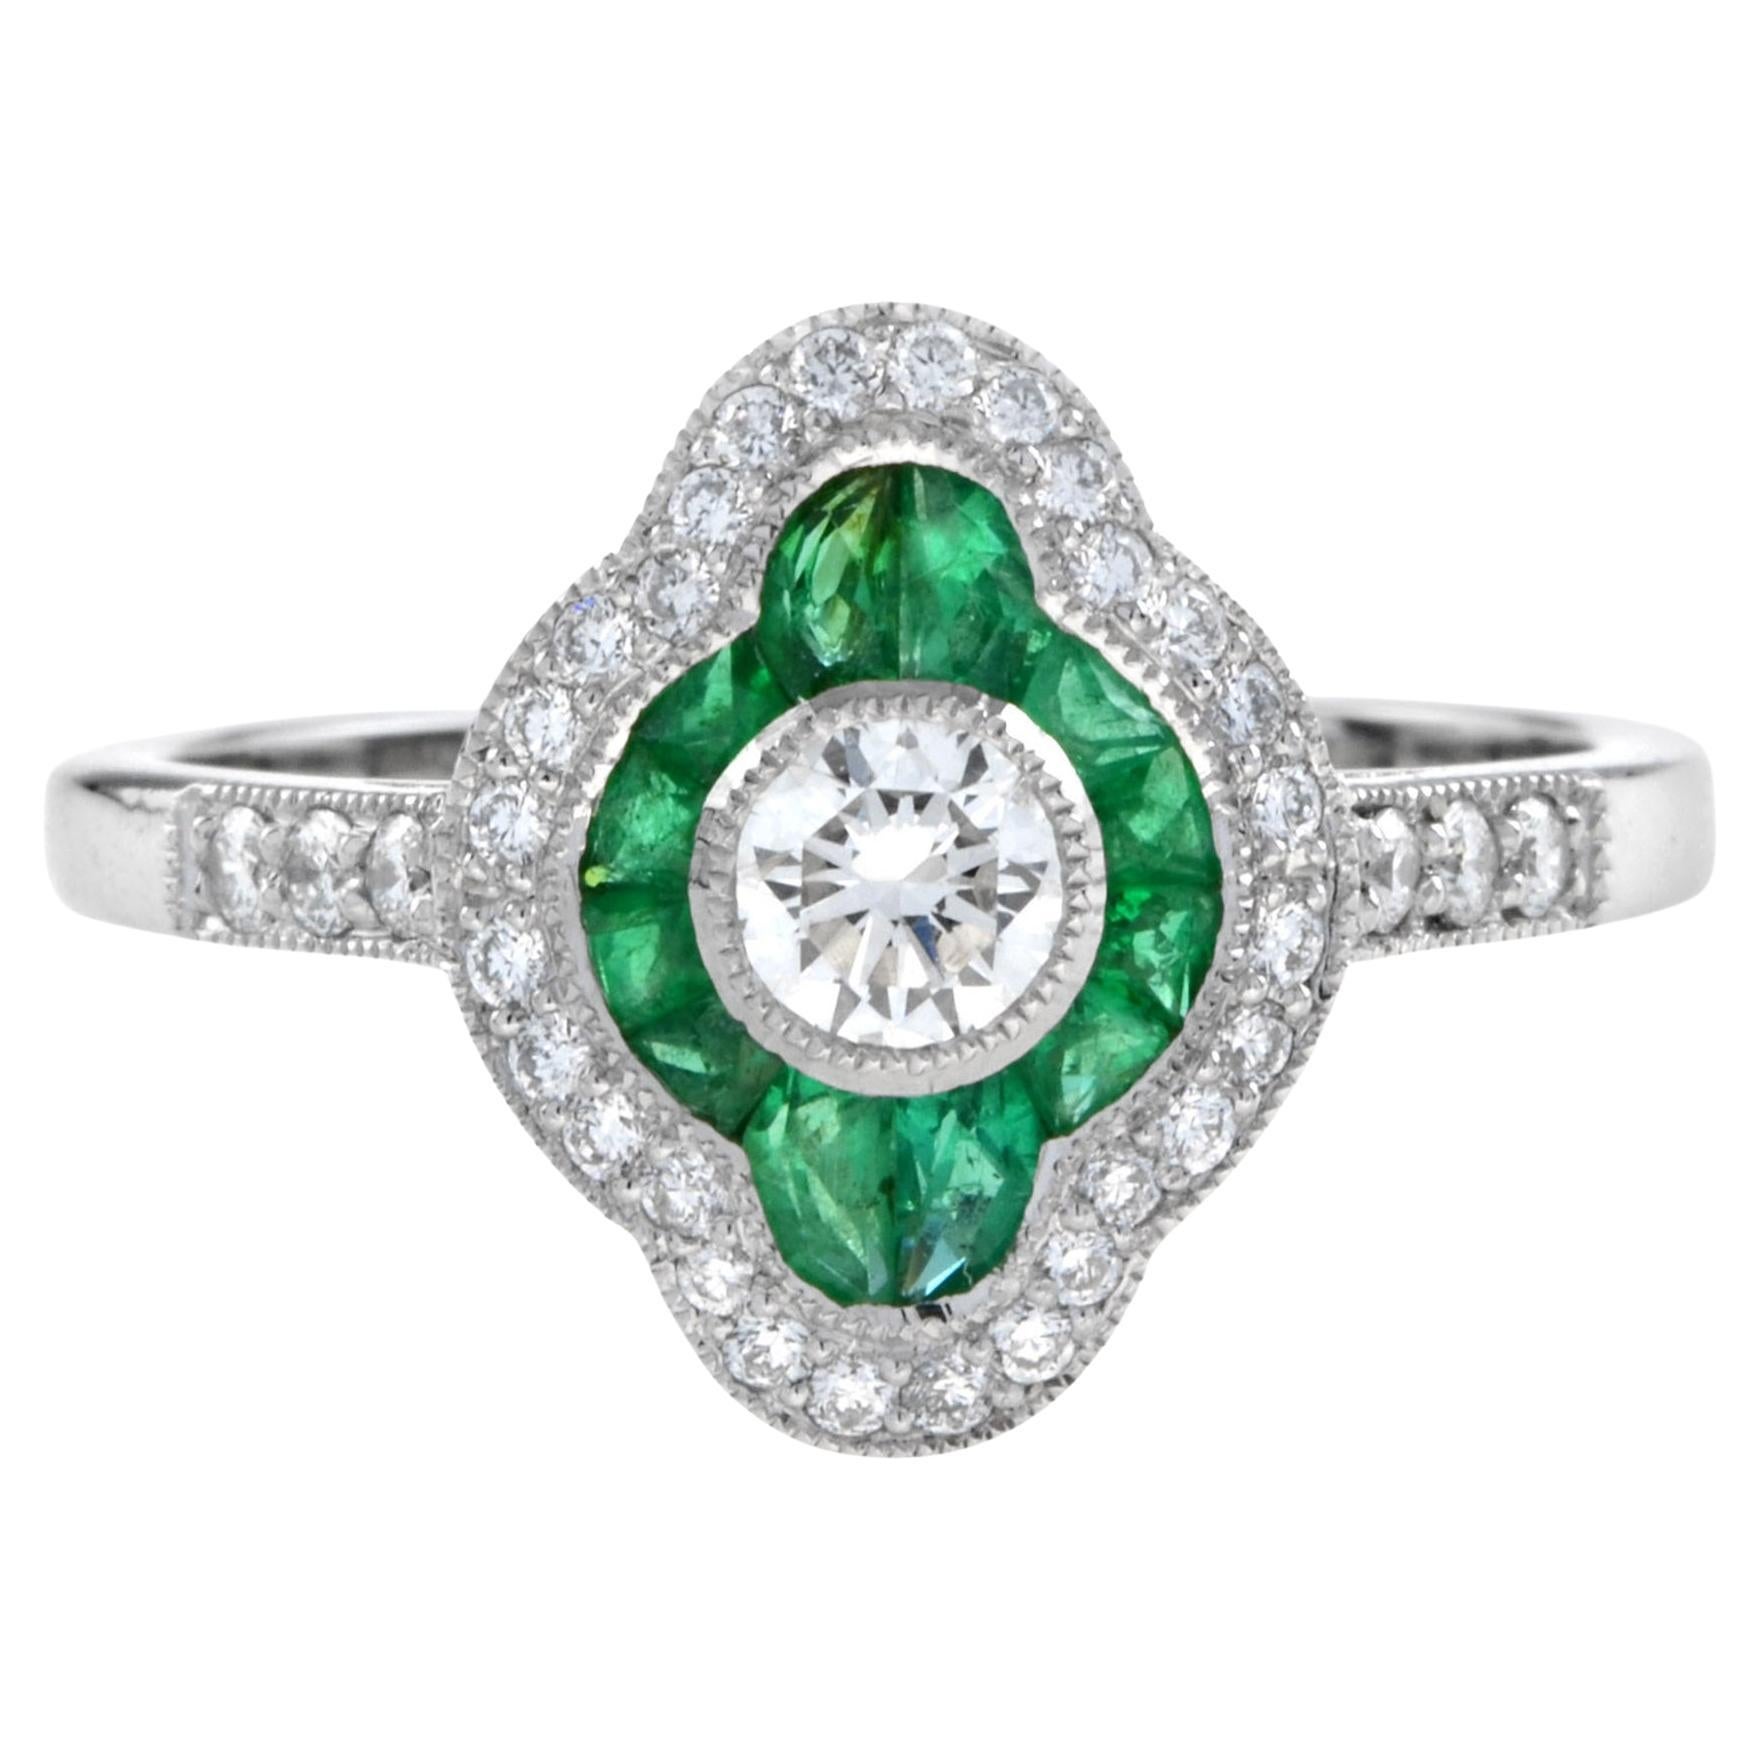 For Sale:  Art Deco Style Diamond and Emerald Engagement Ring in 18K White Gold